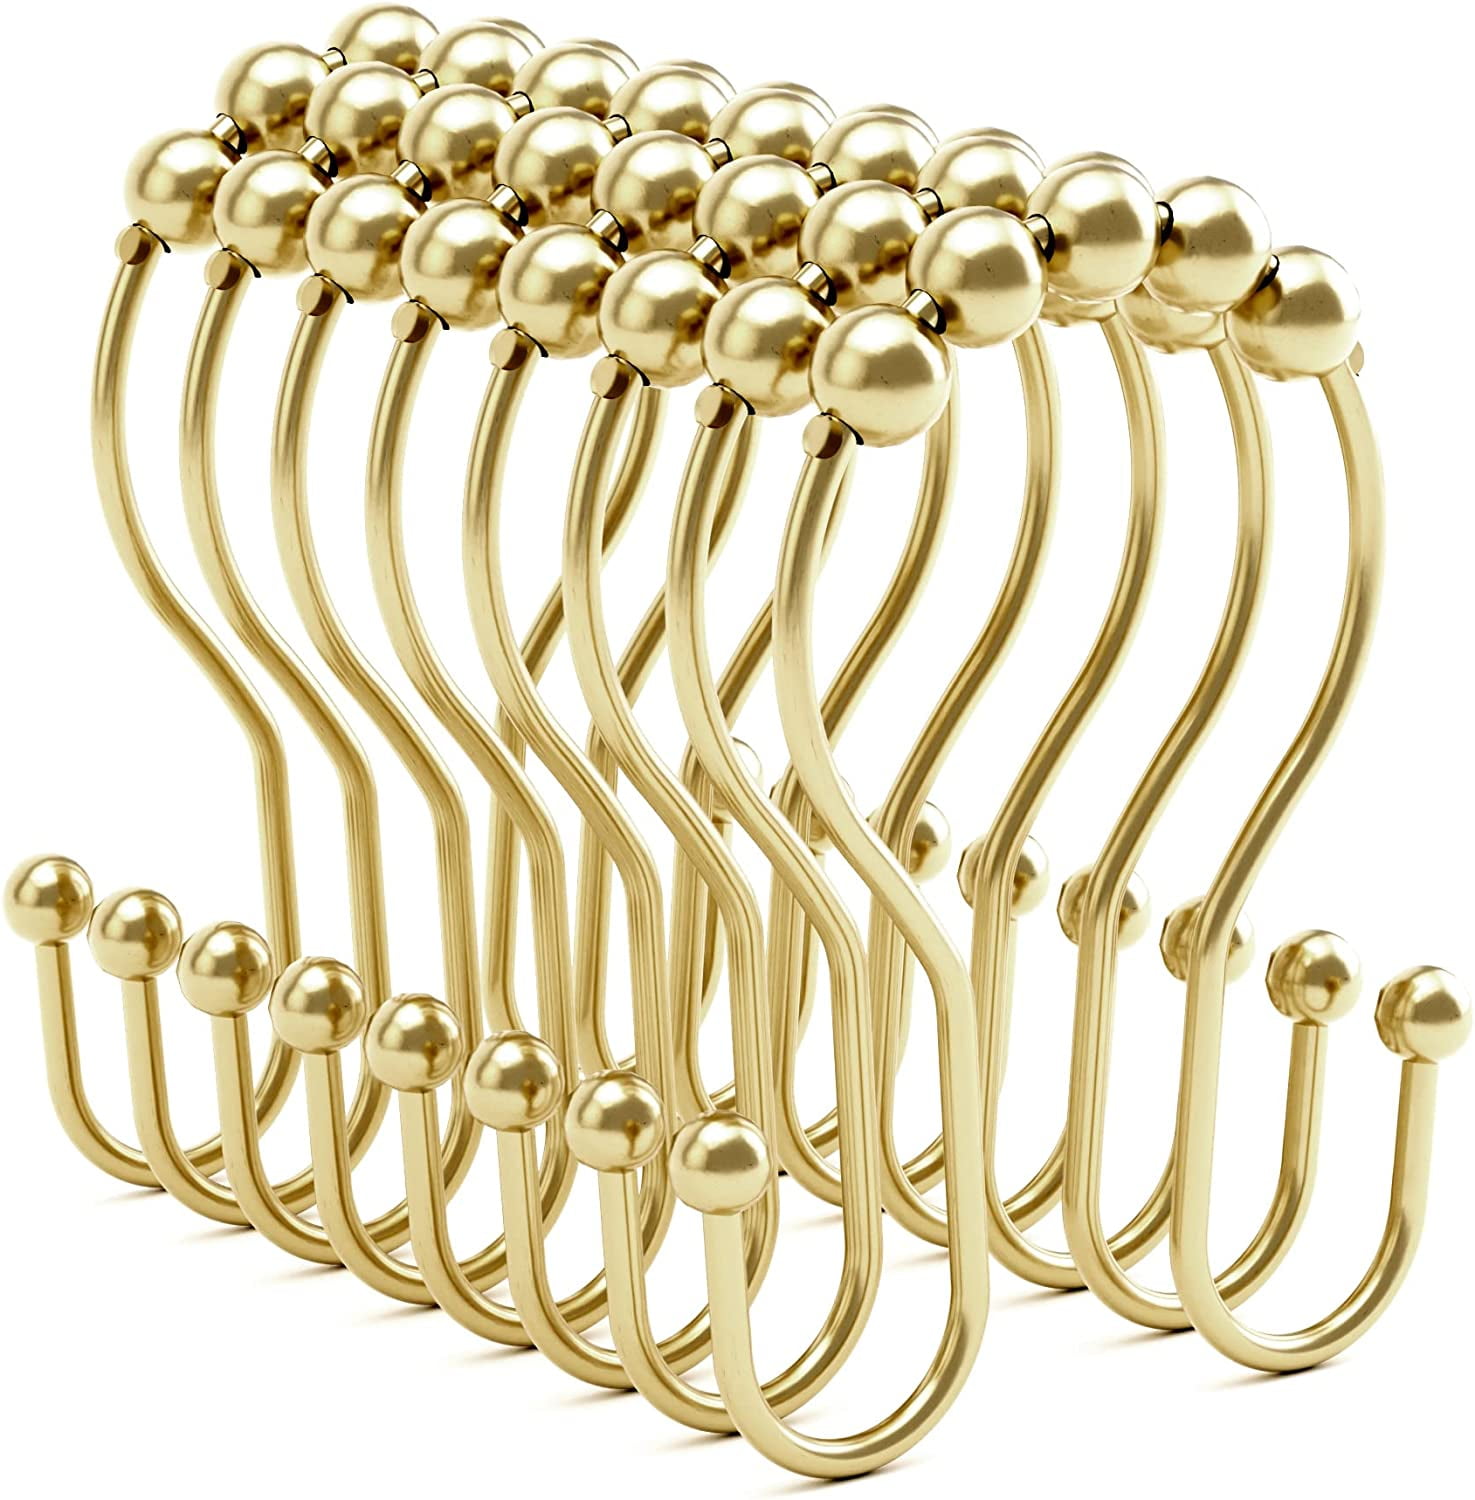 Brass Shower Curtain Hooks, Set Of 12 Metal Shower Rings Gold Decorative,  Premium Rust Resistant S Shaped ?hooks Hangers For Bathroom Curtains,clothin